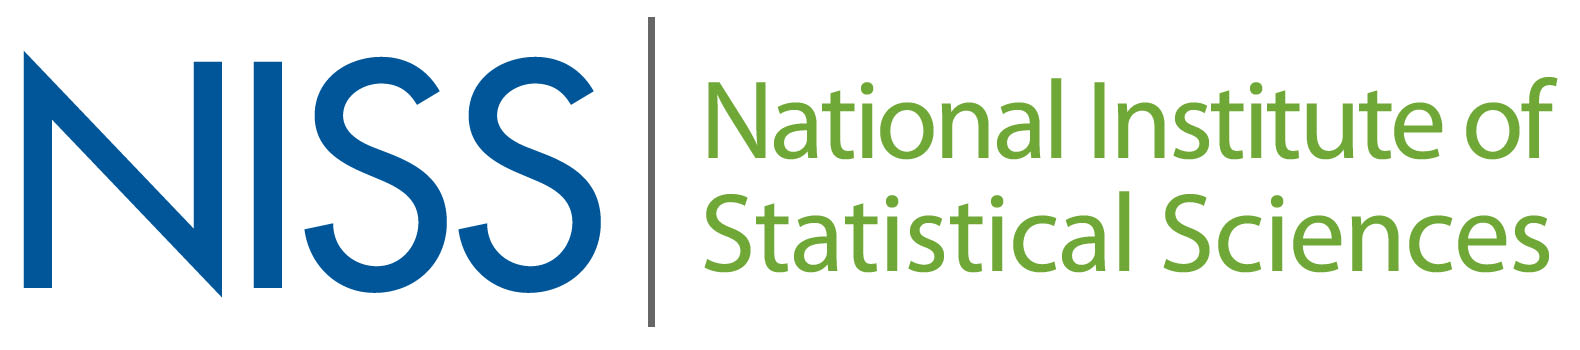 NISS: National Institute of Statistical Sciences